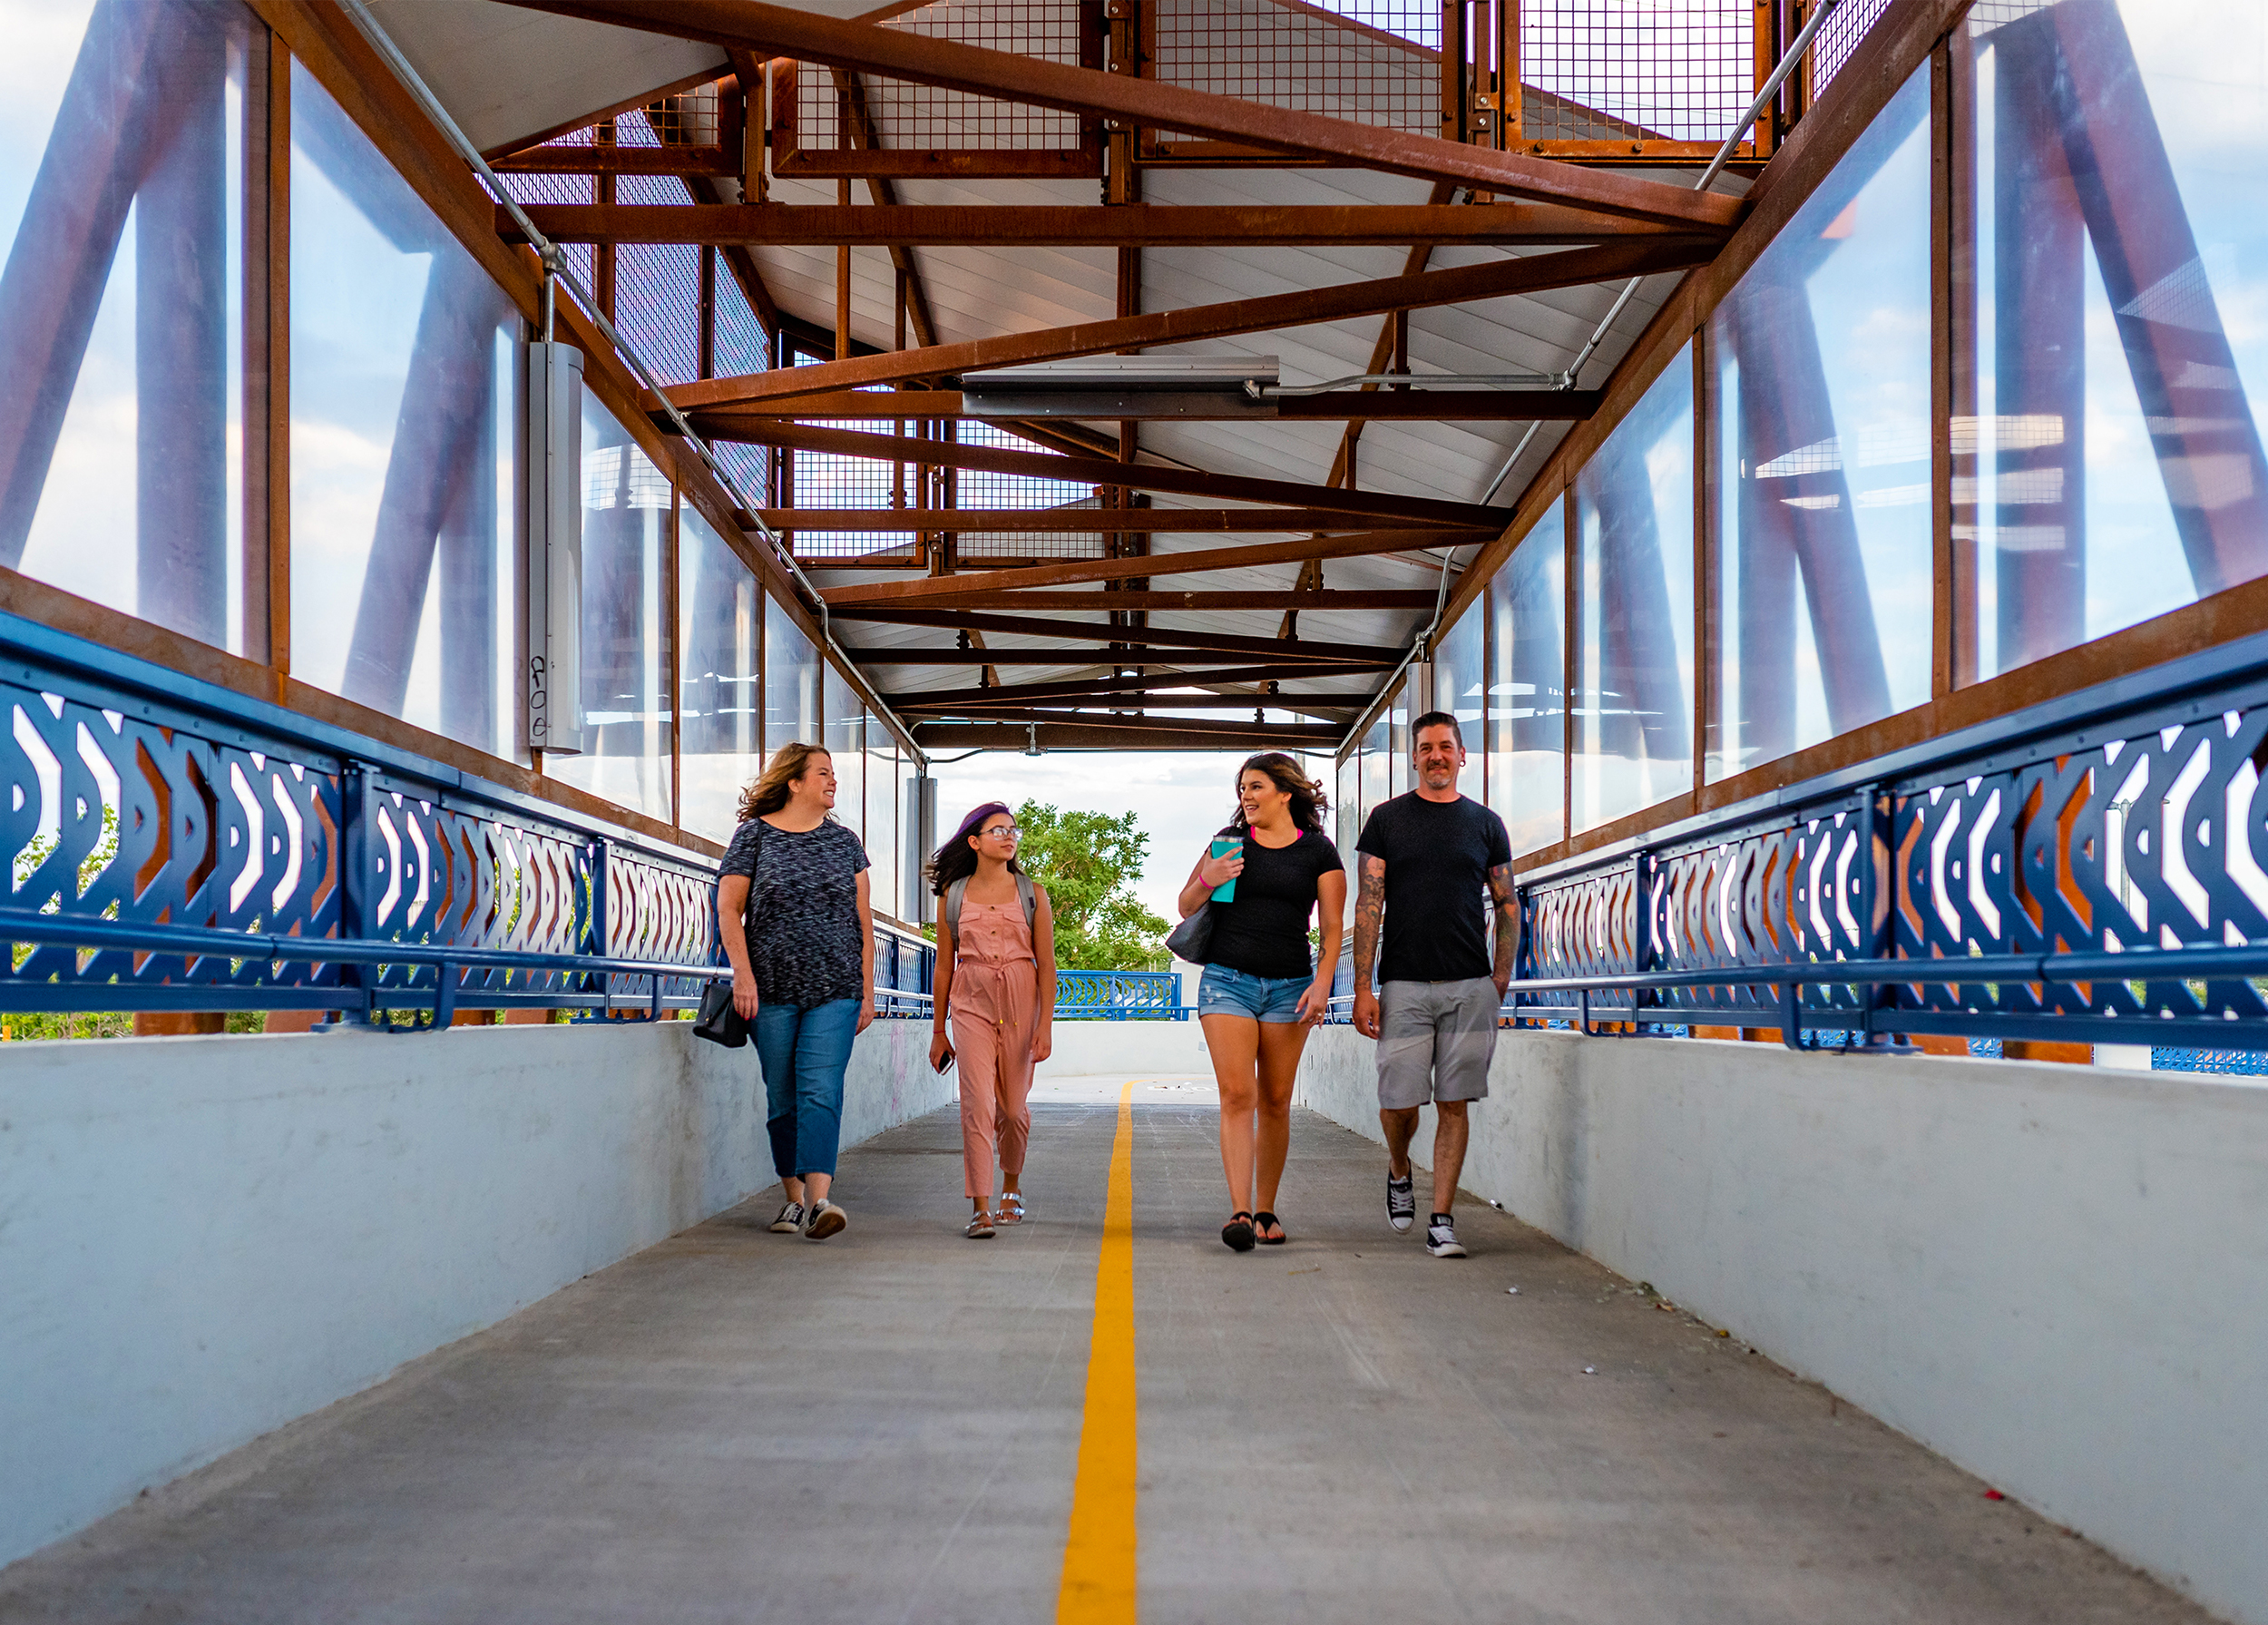 Significant safety improvements were made with the construction of the 47th and York Pedestrian Bridge, allowing the community a grade-separated space to cross the UPRR tracks.